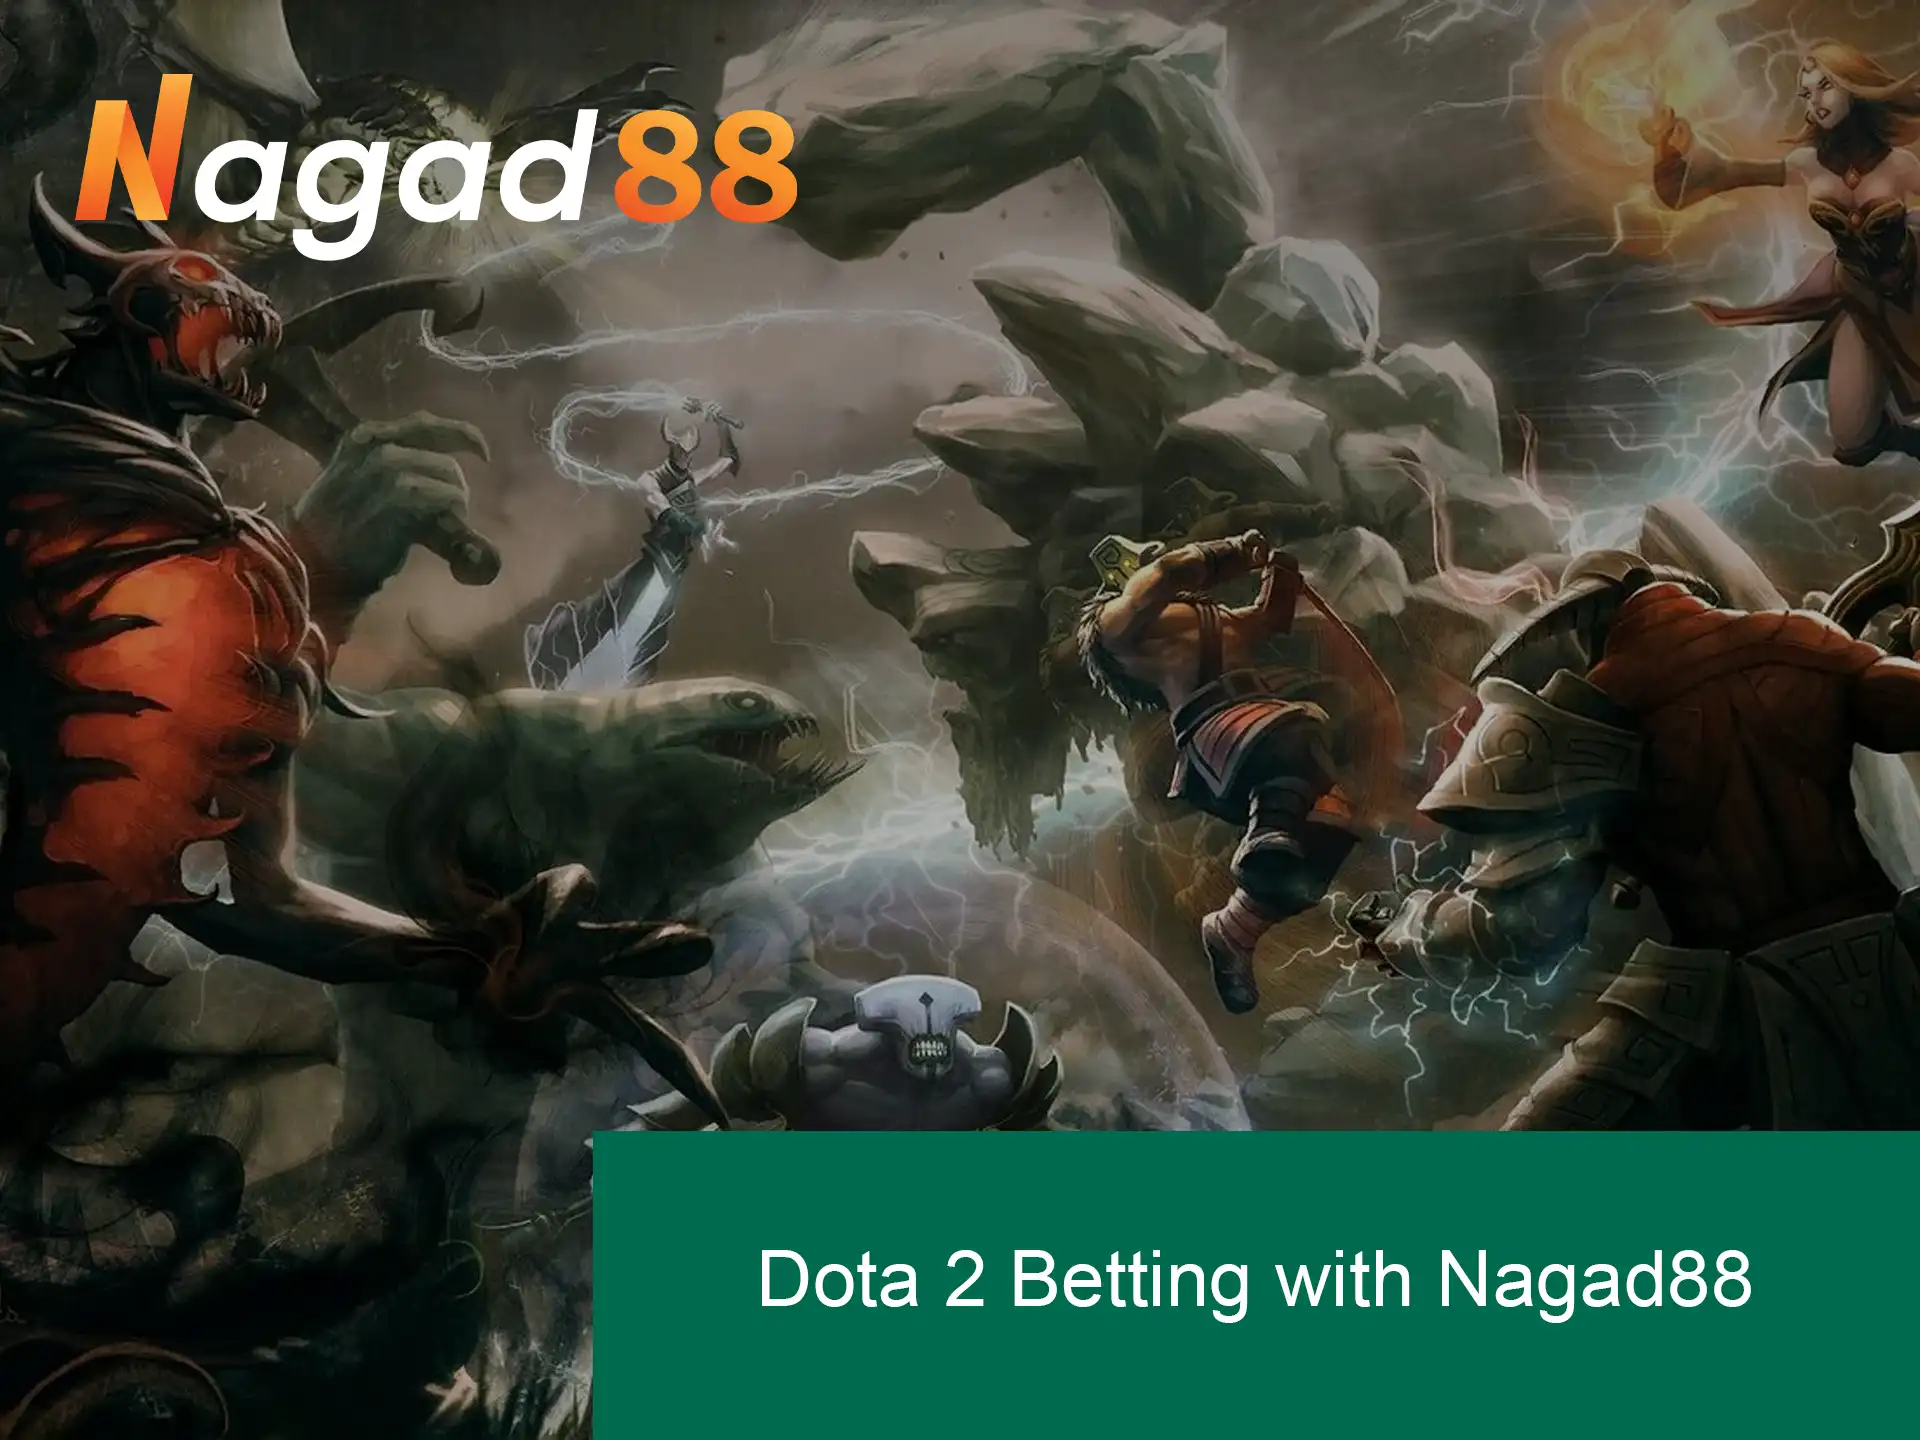 New Nagad88 users will get +100% first deposit bonus and the opportunity to bet on Dota 2.